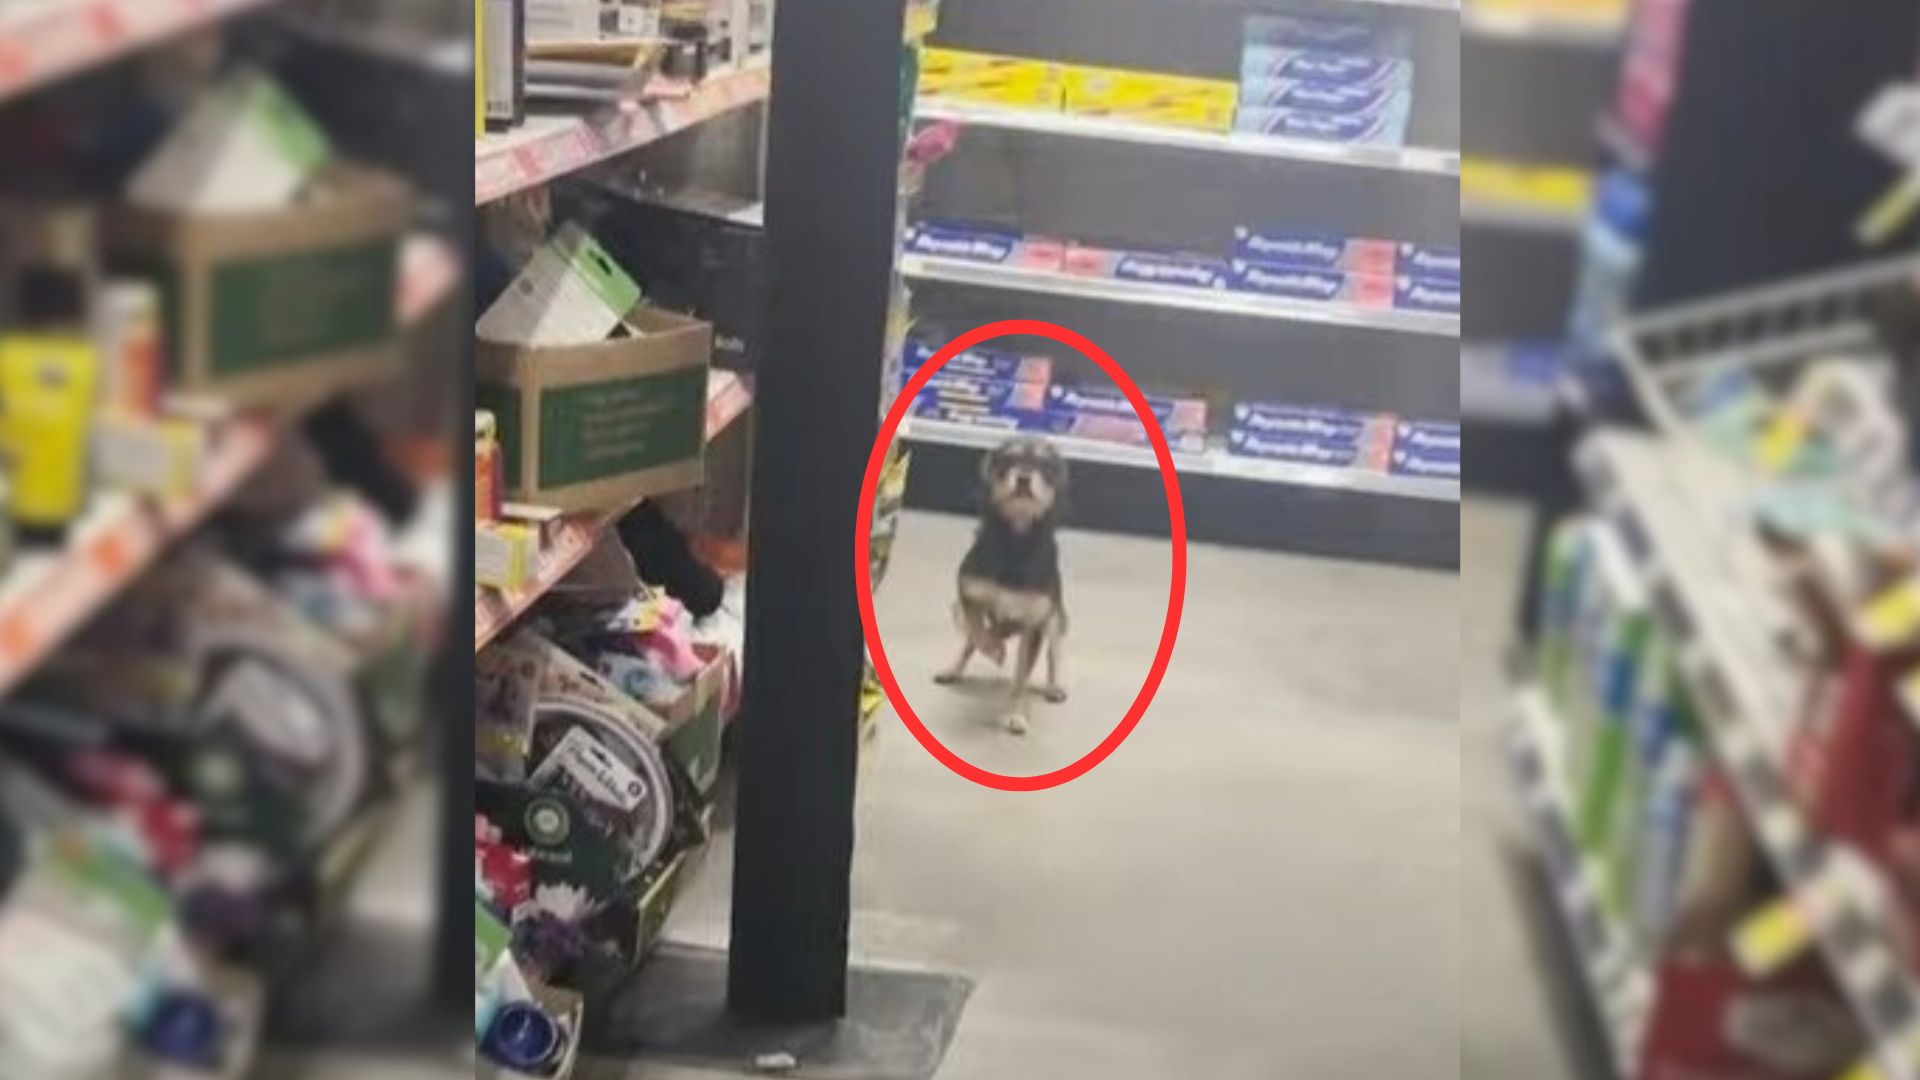 A Man Discovers An Adorable Stray Pup Running Around At The Store